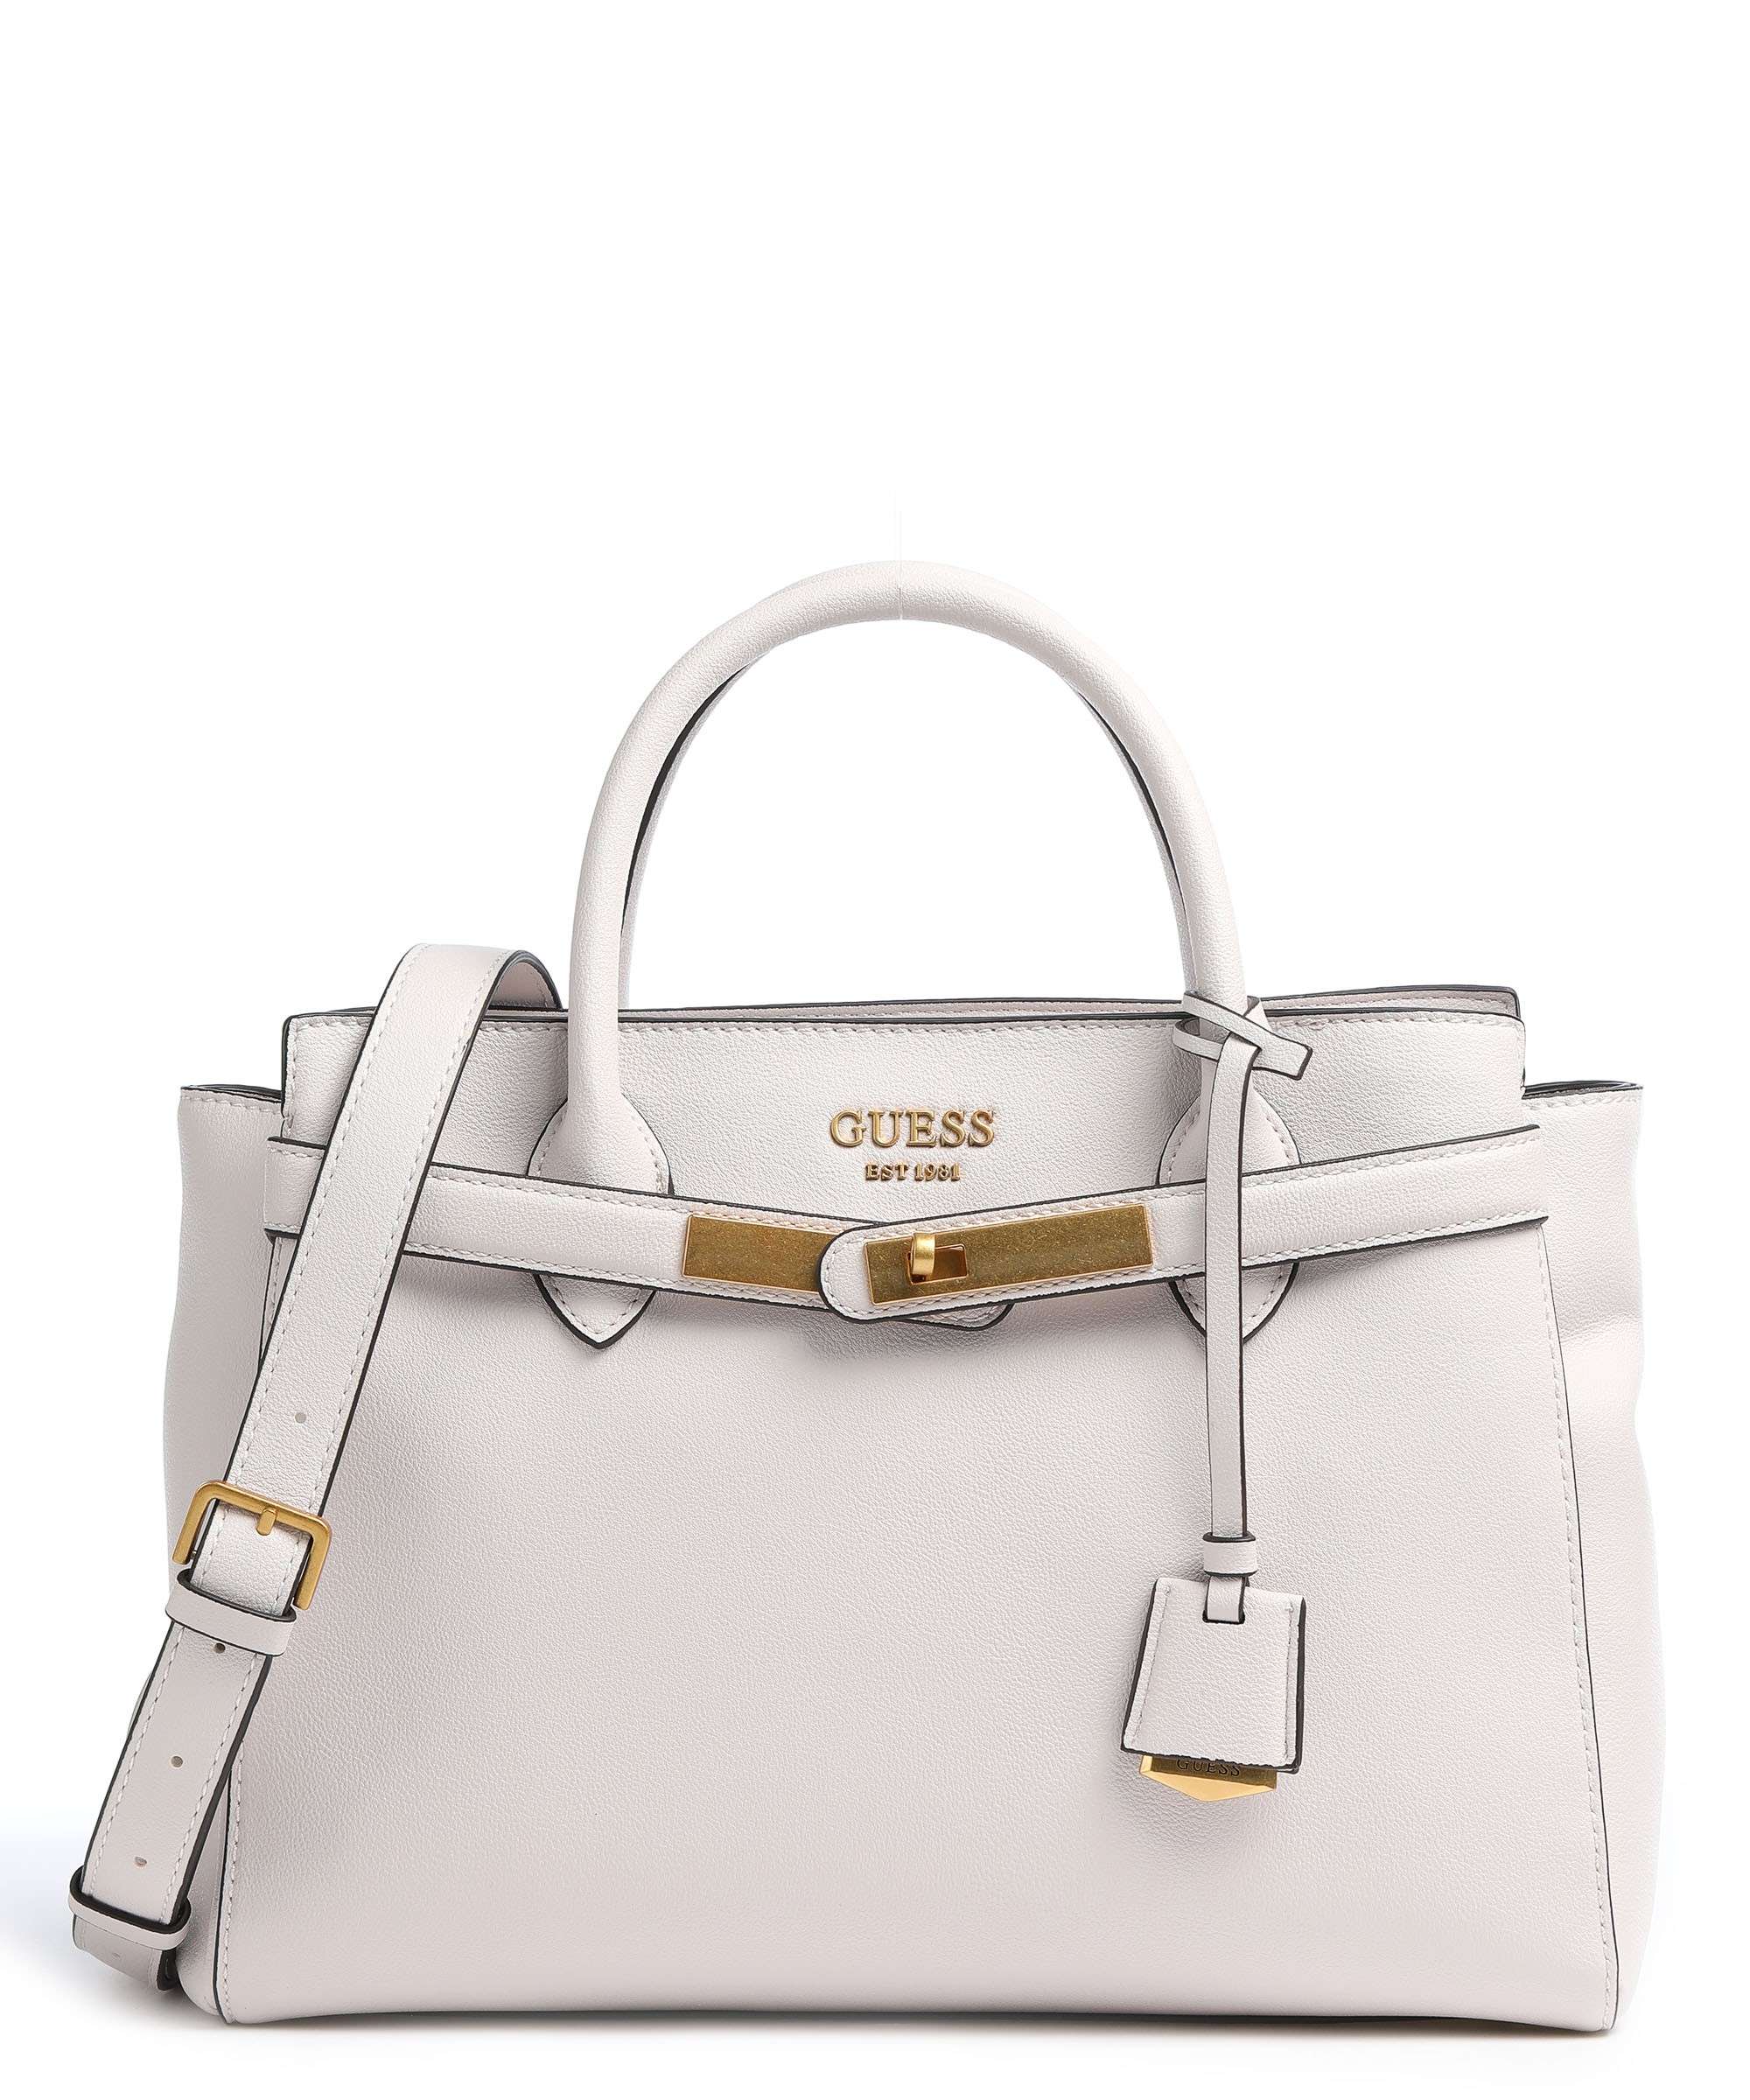 Guess Enisa High Society Satchel